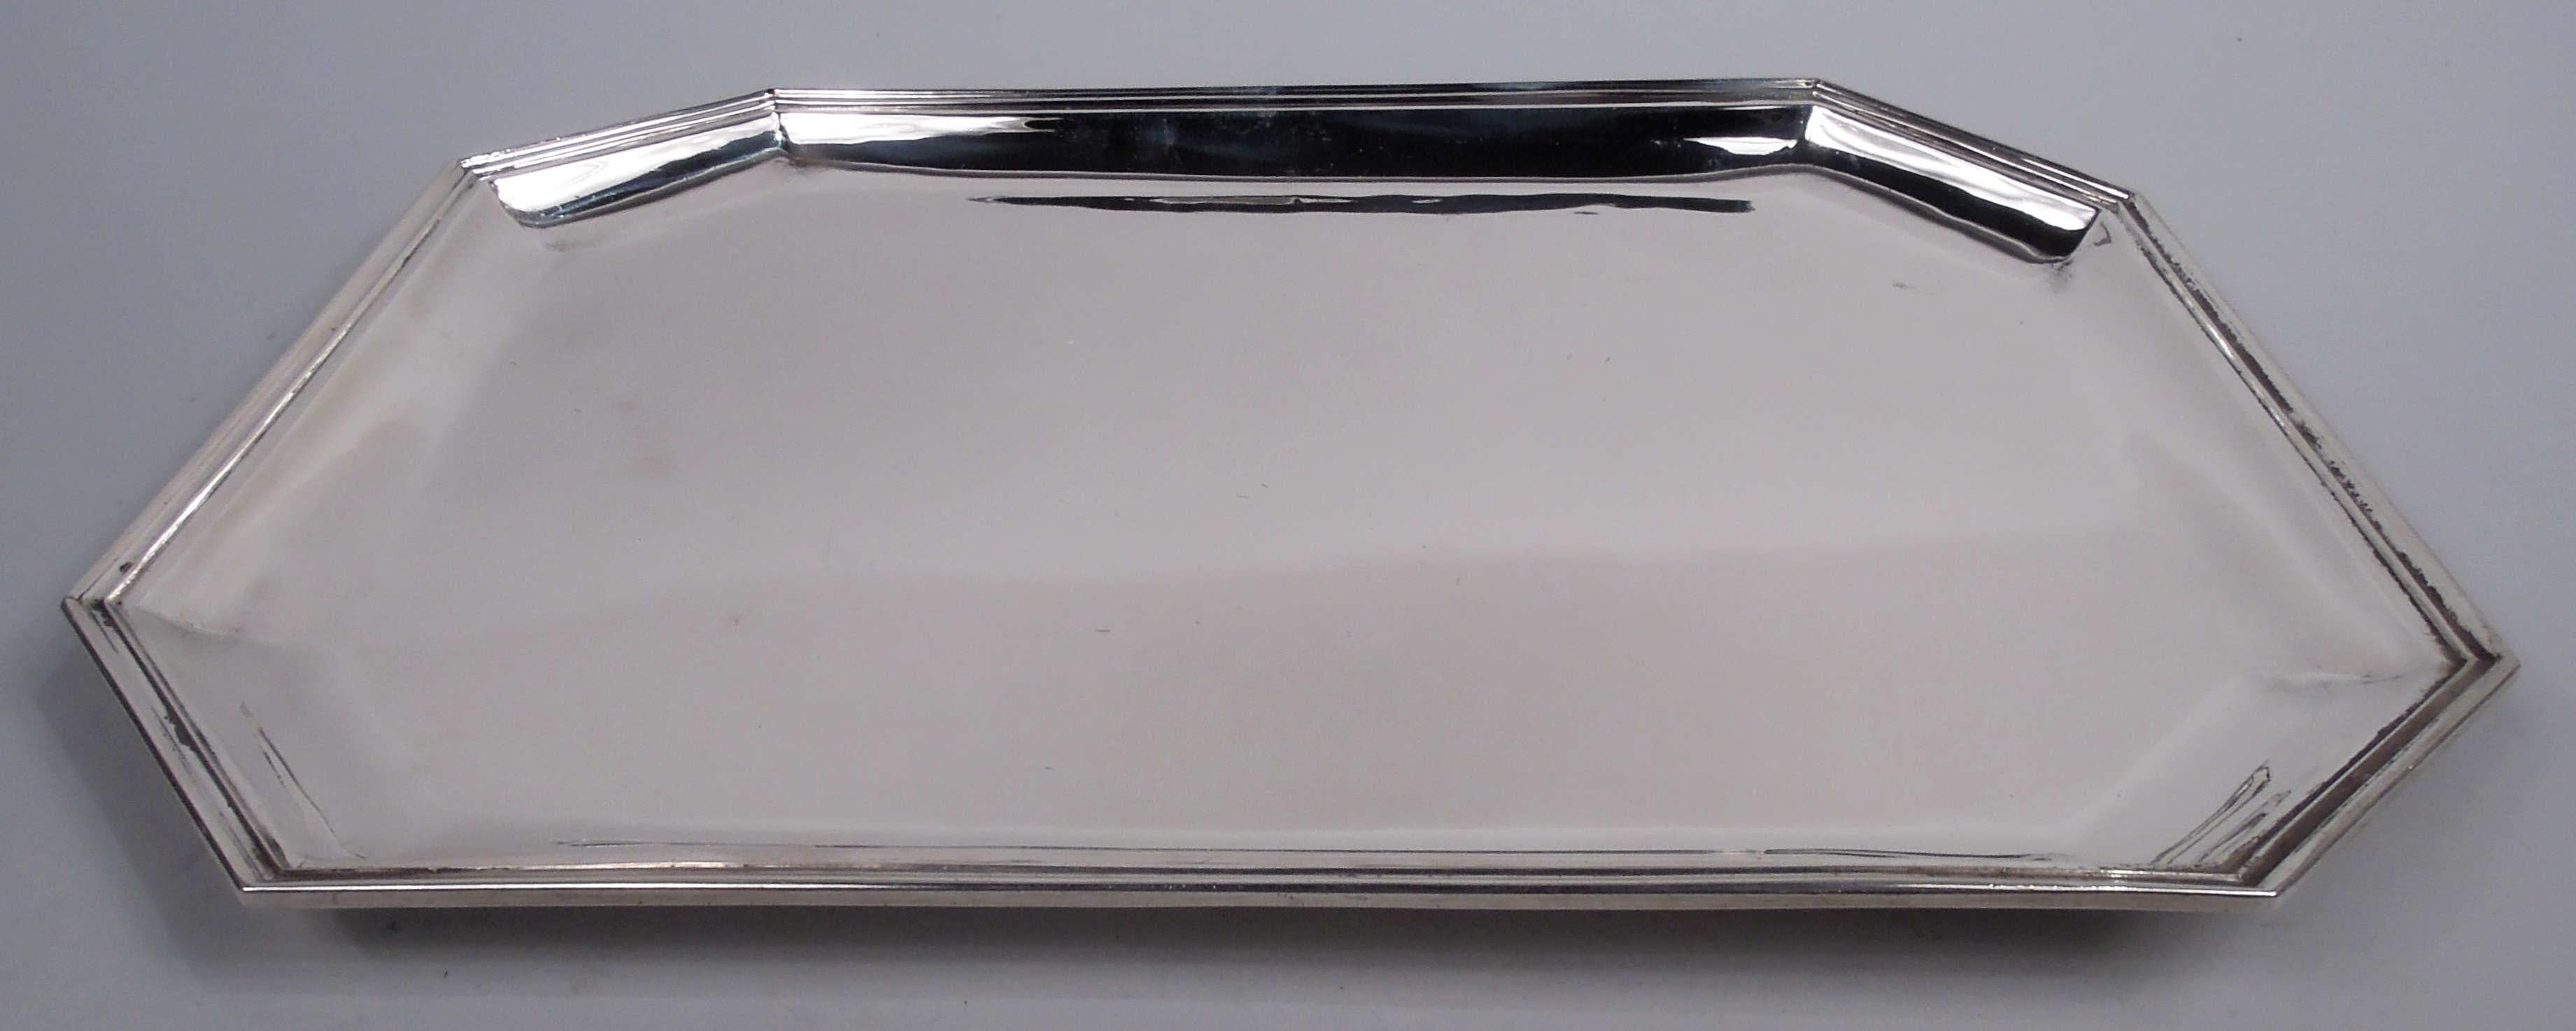 American Art Deco sterling silver tray, ca 1925. Retailed by Cartier in New York. Rectangular with chamfered corners, tapering sides, and molded rim. Fully marked including retailer’s stamp, no. 25/4, and phrase “Hand Made”. Weight: 23.8 troy ounces.